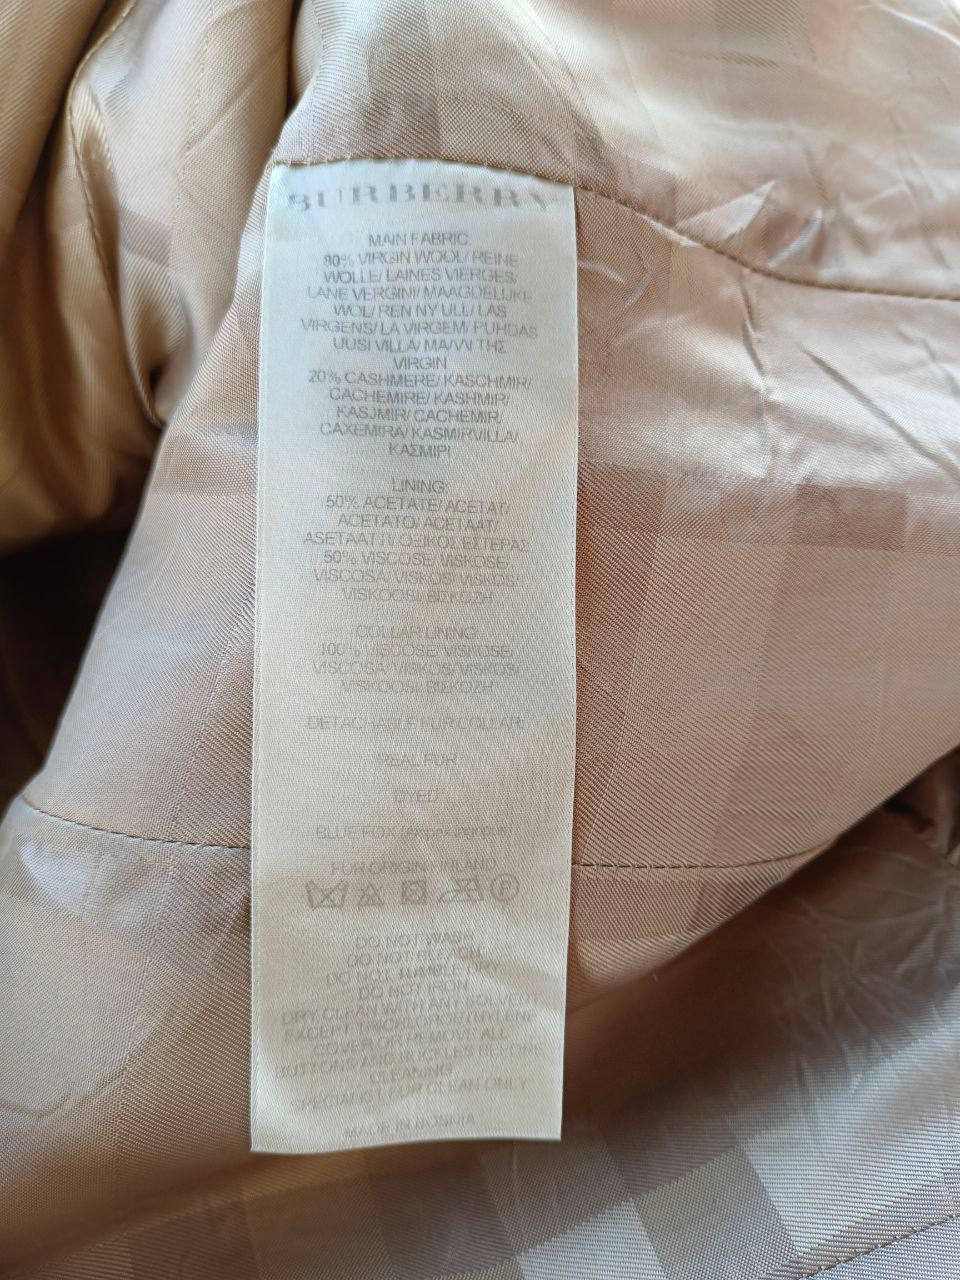 Burberry Burberry London Double Breasted Virgin Wool Coat Size XL / US 12-14 / IT 48-50 - 11 Preview